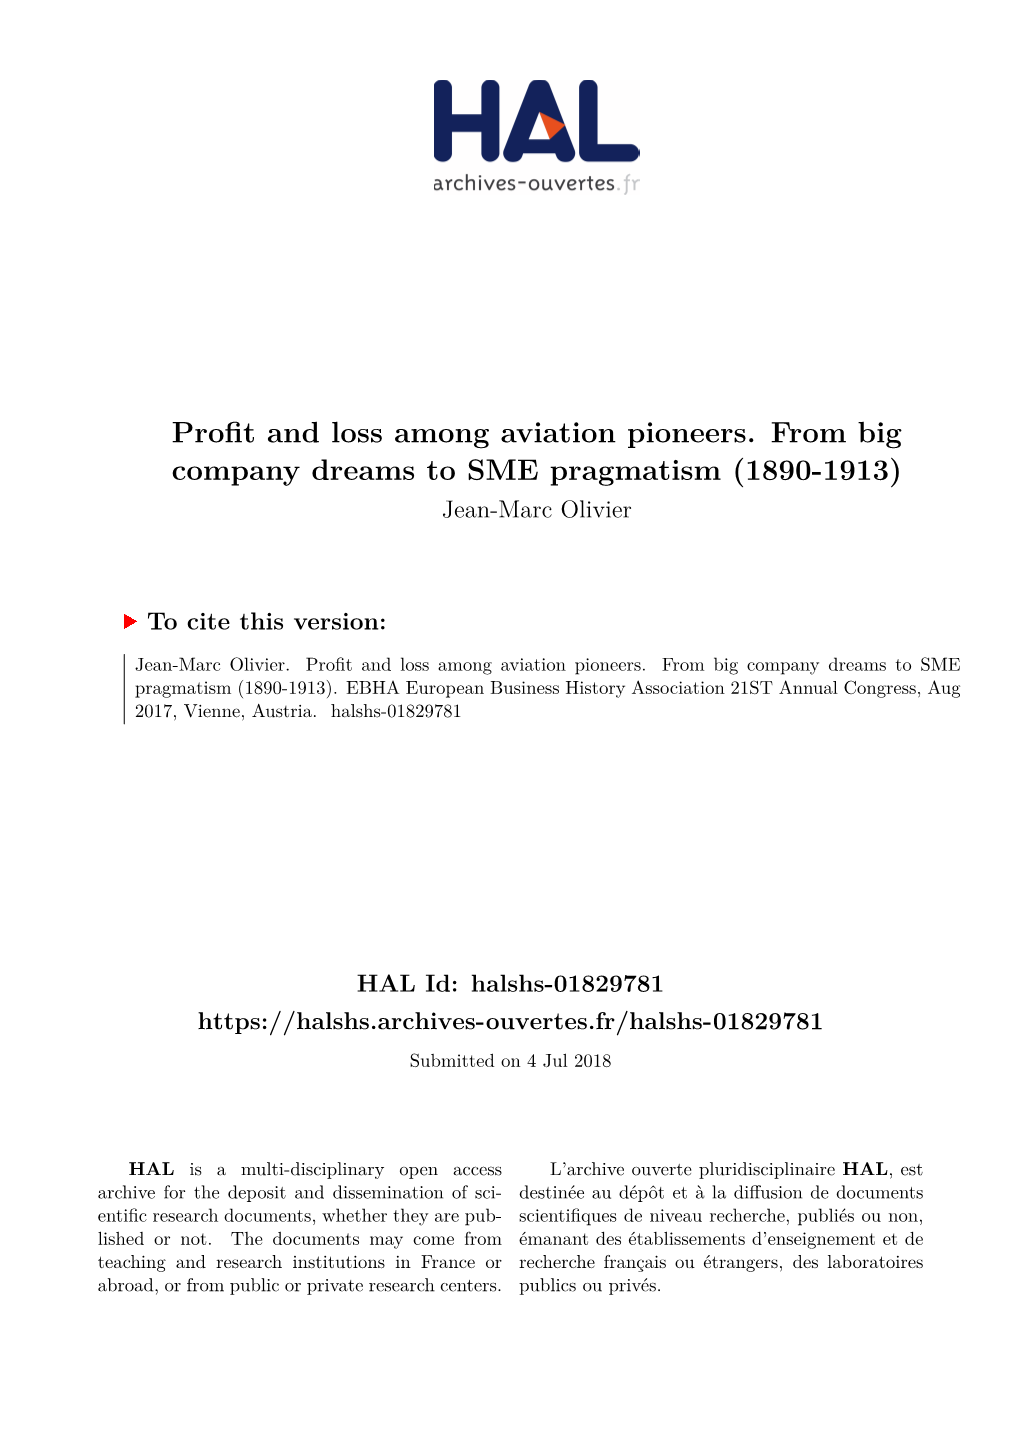 Profit and Loss Among Aviation Pioneers. from Big Company Dreams to SME Pragmatism (1890-1913) Jean-Marc Olivier